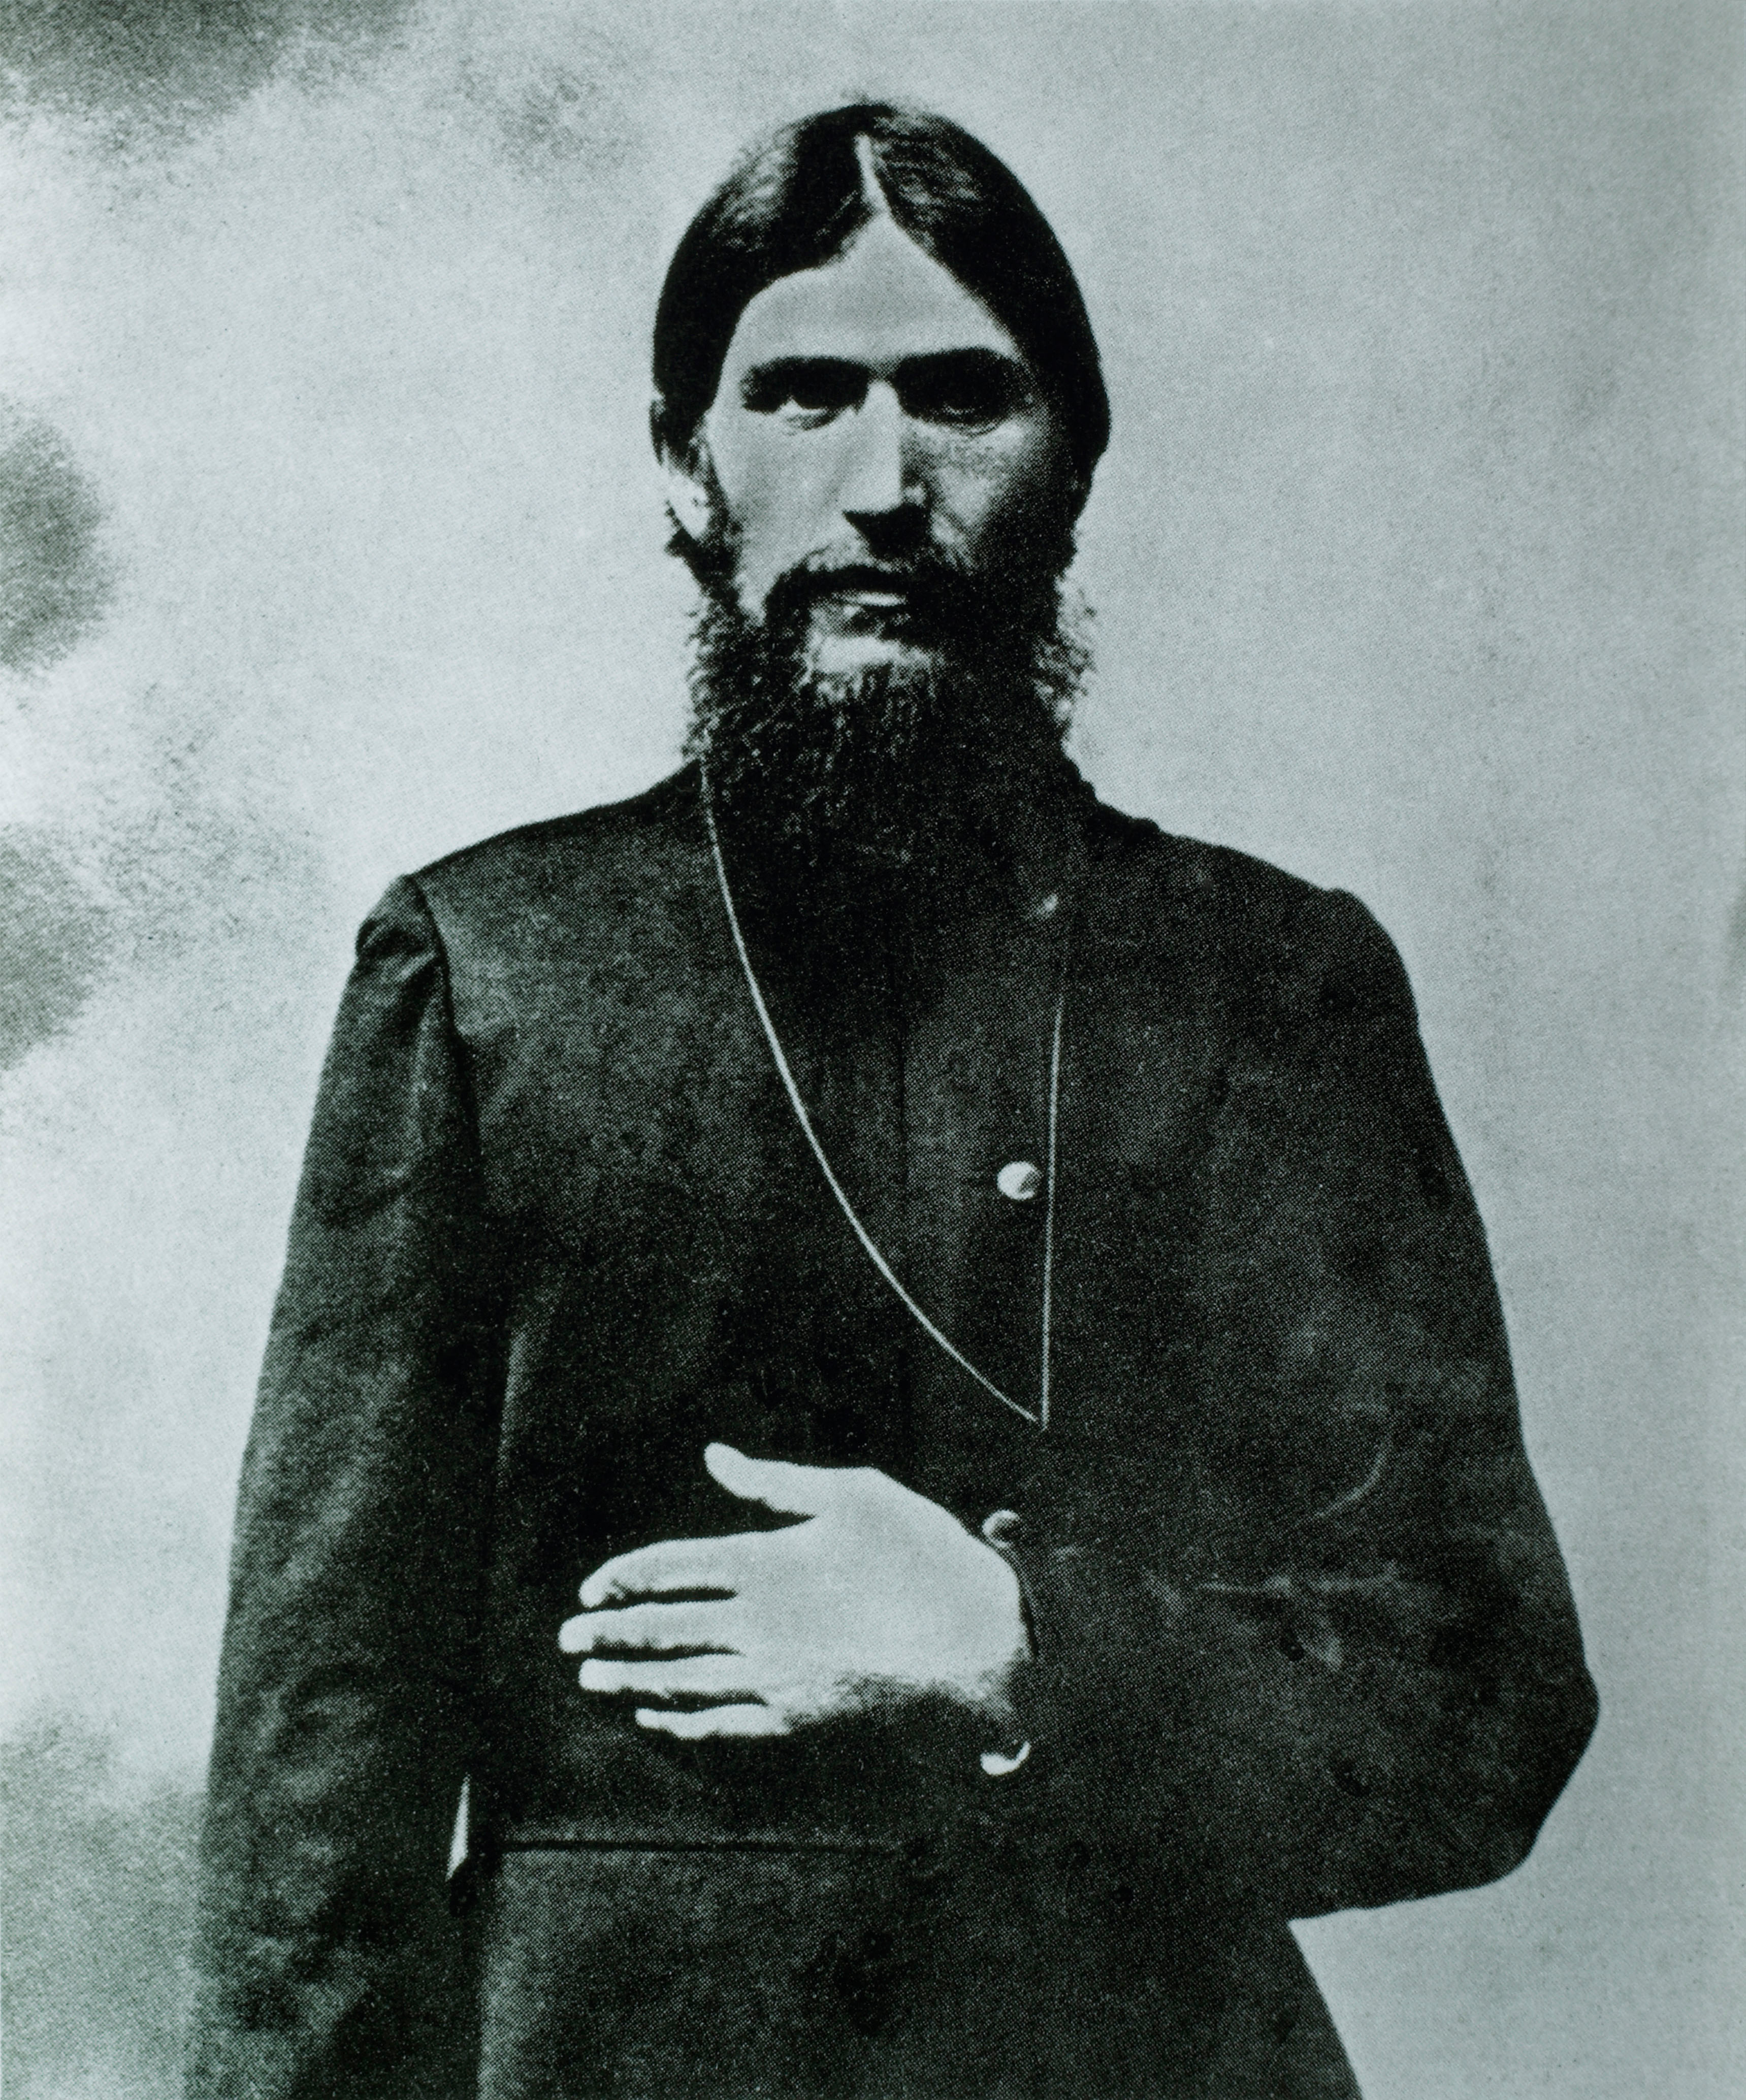 A photo of the real Rasputin, dressed in black, his left hand is resting on his stomach